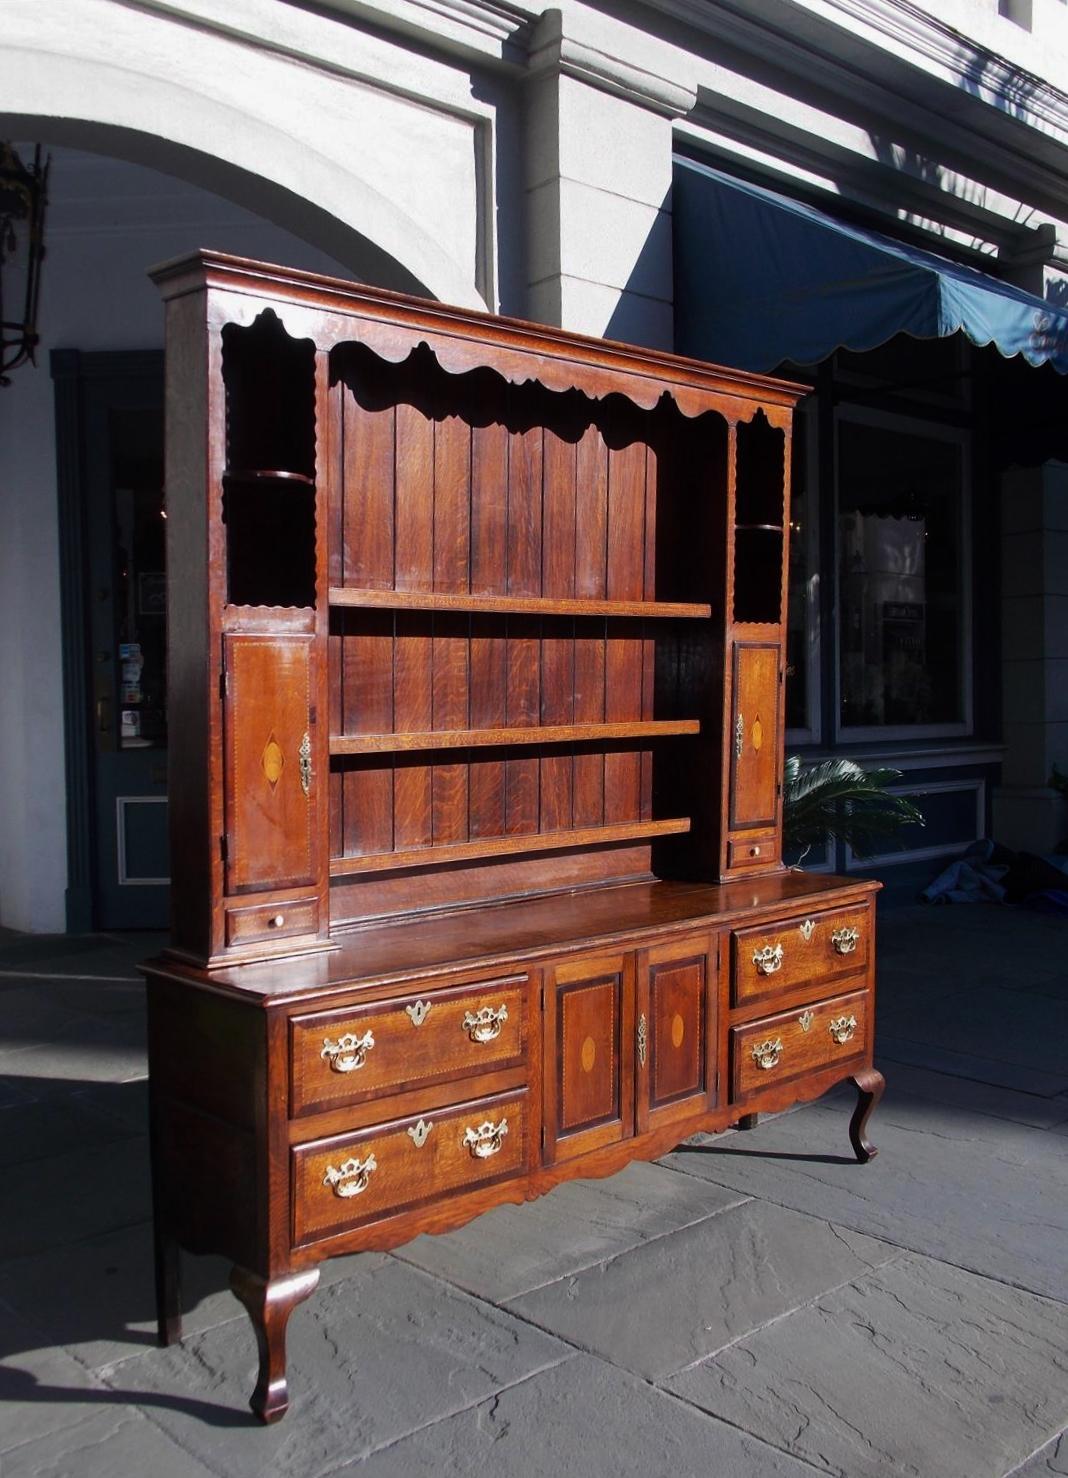 English Chippendale oak welsh dresser with a carved molded scalloped cornice, upper case with decorative carved flanking shelves, hinged cabinet doors cross banded with walnut and satinwood diamond thistle inlays revealing interior shelves, three